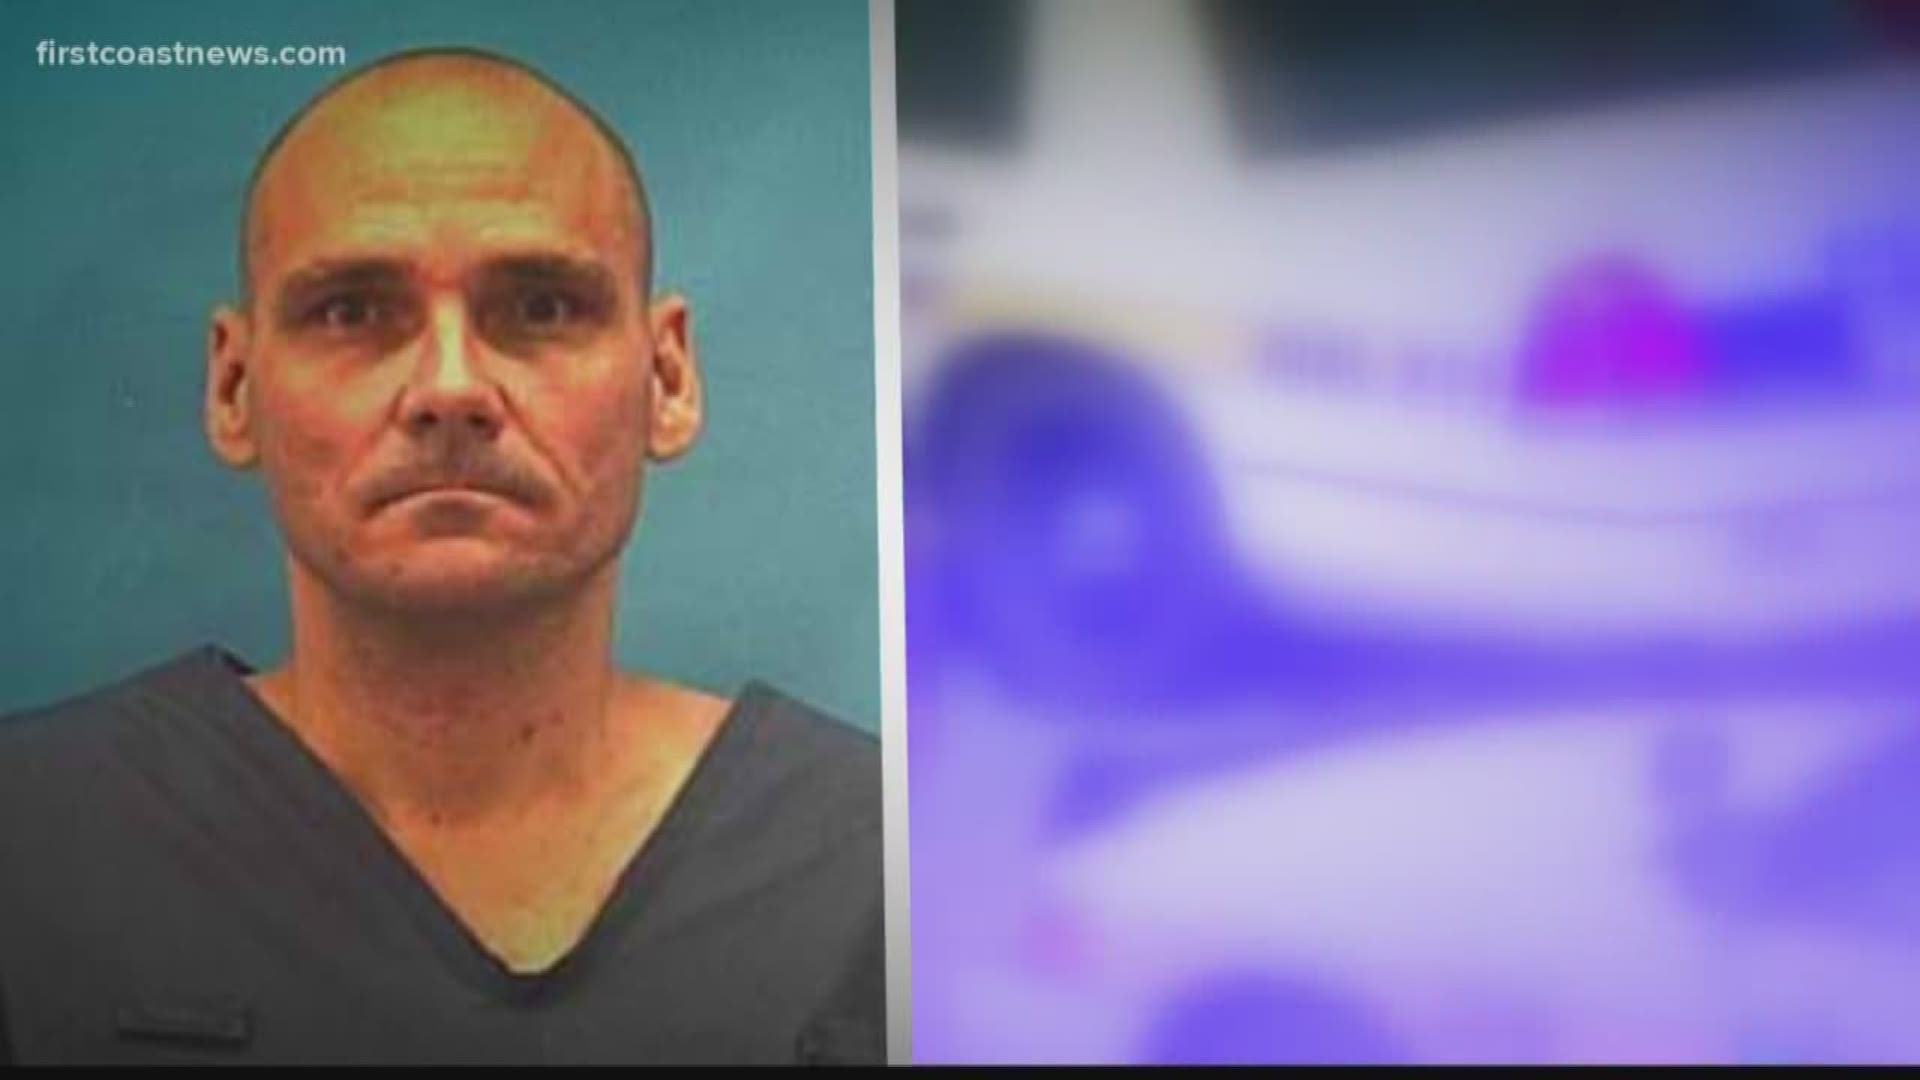 In May 2003, William Wells killed five people, starting with his wife. He told First Coast News he'd kill again. Now, according to law enforcement sources, he did -- two weeks ago, at Florida State Prison.